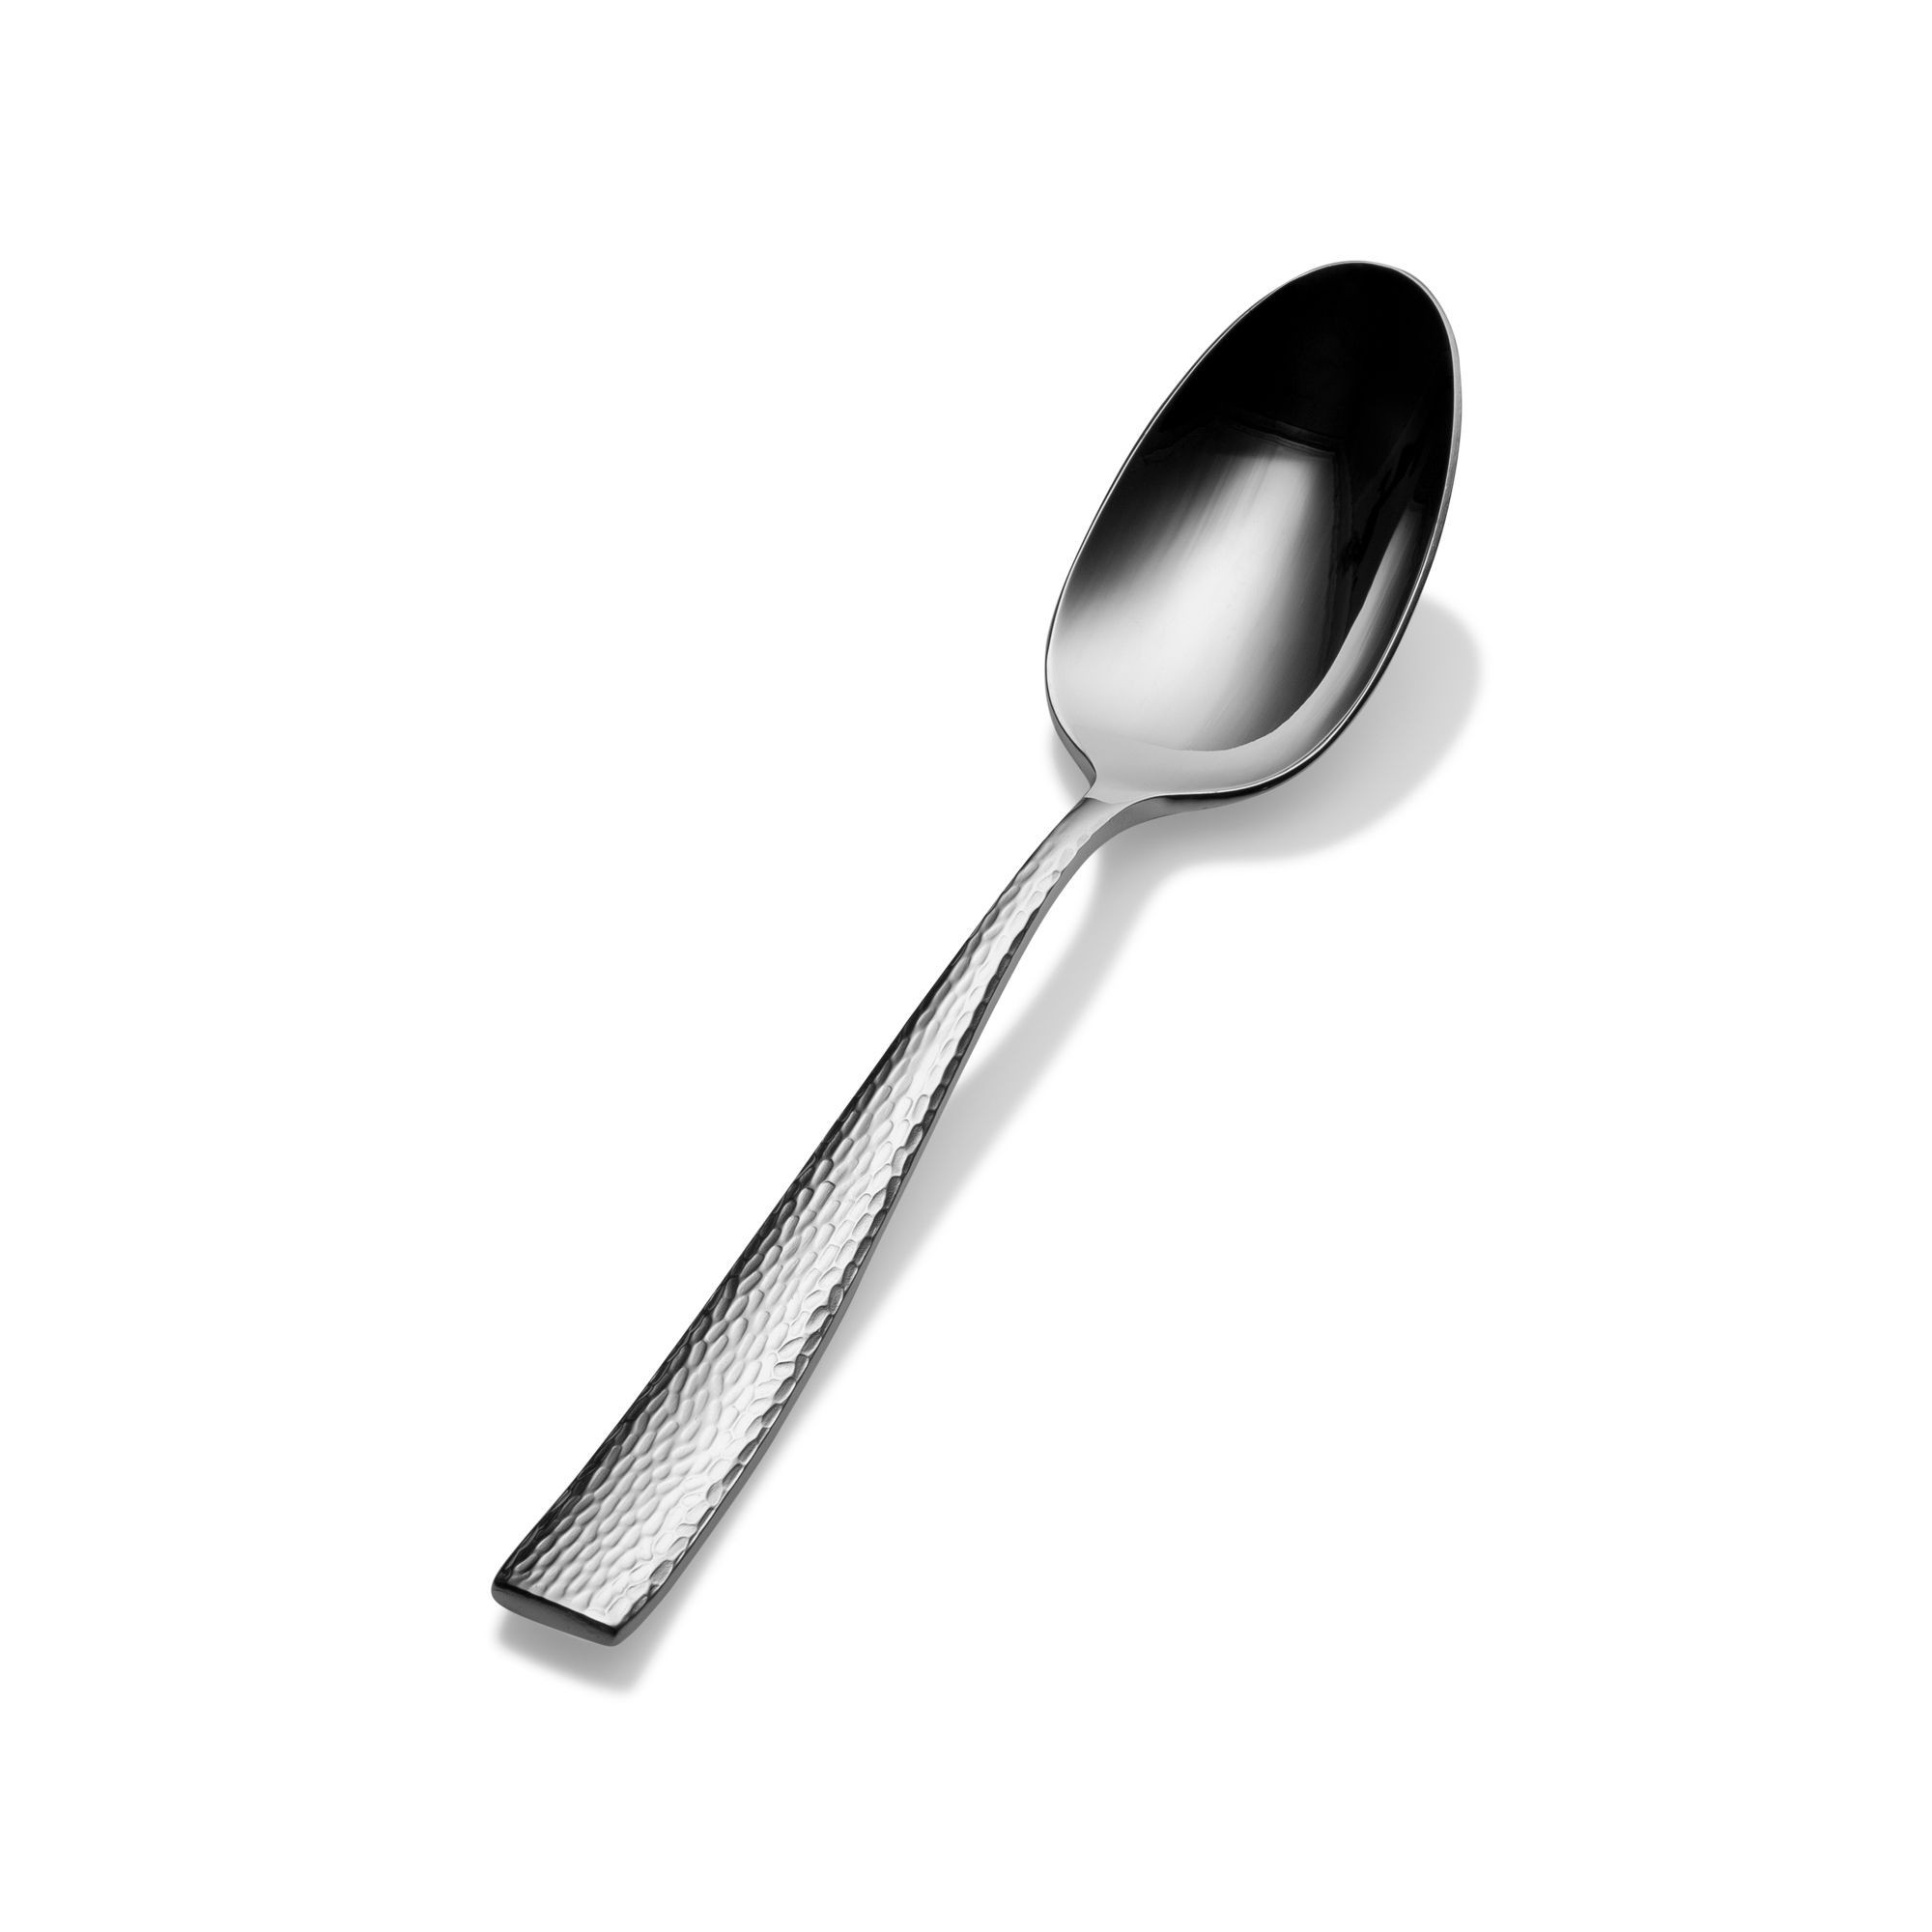 Bon Chef S3904S Scarlett 18/8 Stainless Steel Silverplated Serving Spoon